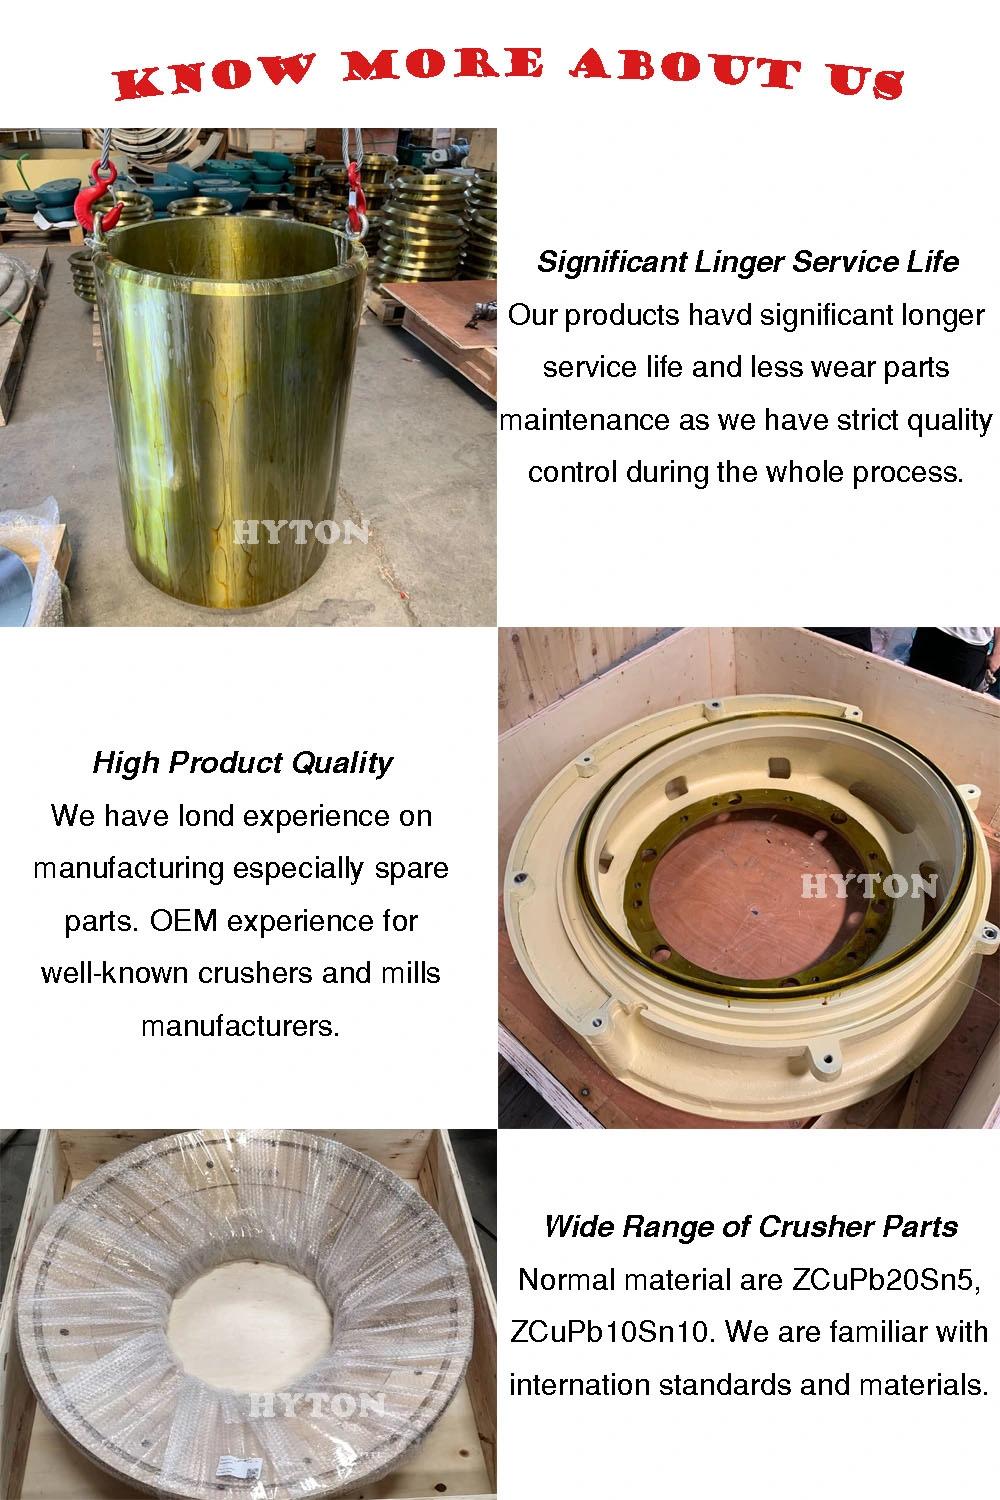 CH440 Cone Crusher Parts Mainshaft Assembly